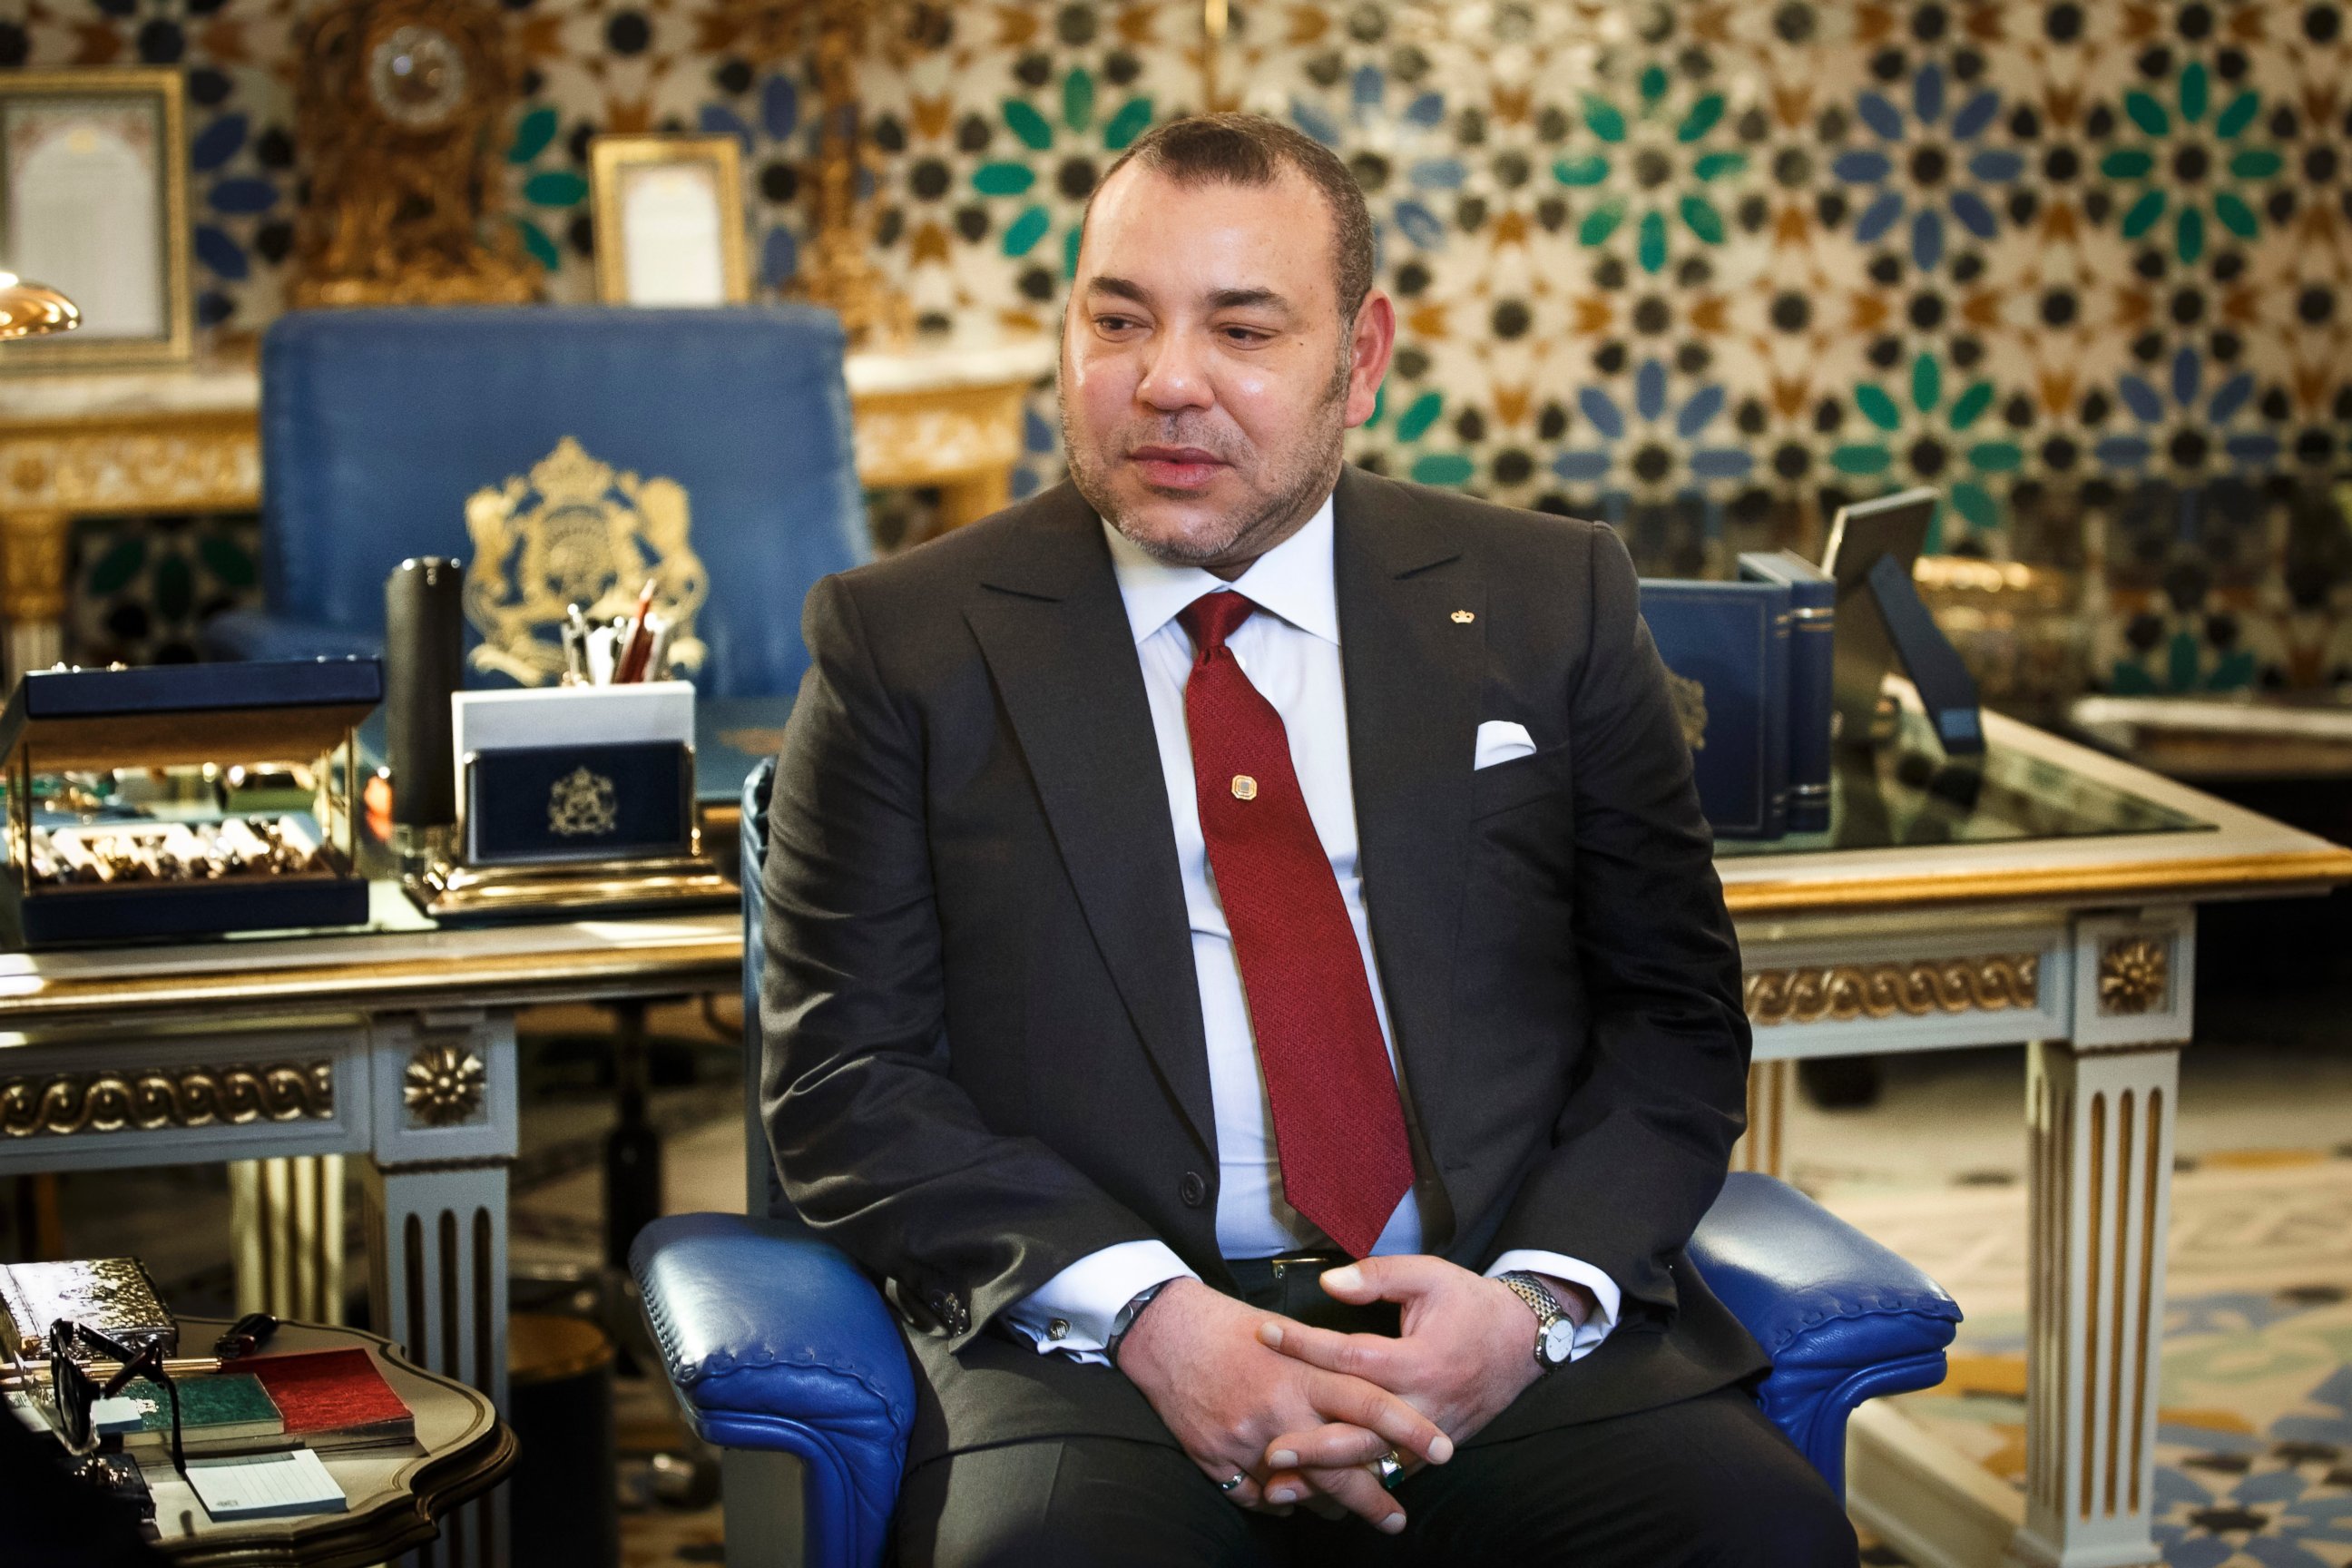 PHOTO: Morocco's King Mohammed VI is seen during a meeting with German Foreign Minister Frank-Walter Steinmeier, Jan. 22, 2015, in Marrakesh, Morocco.